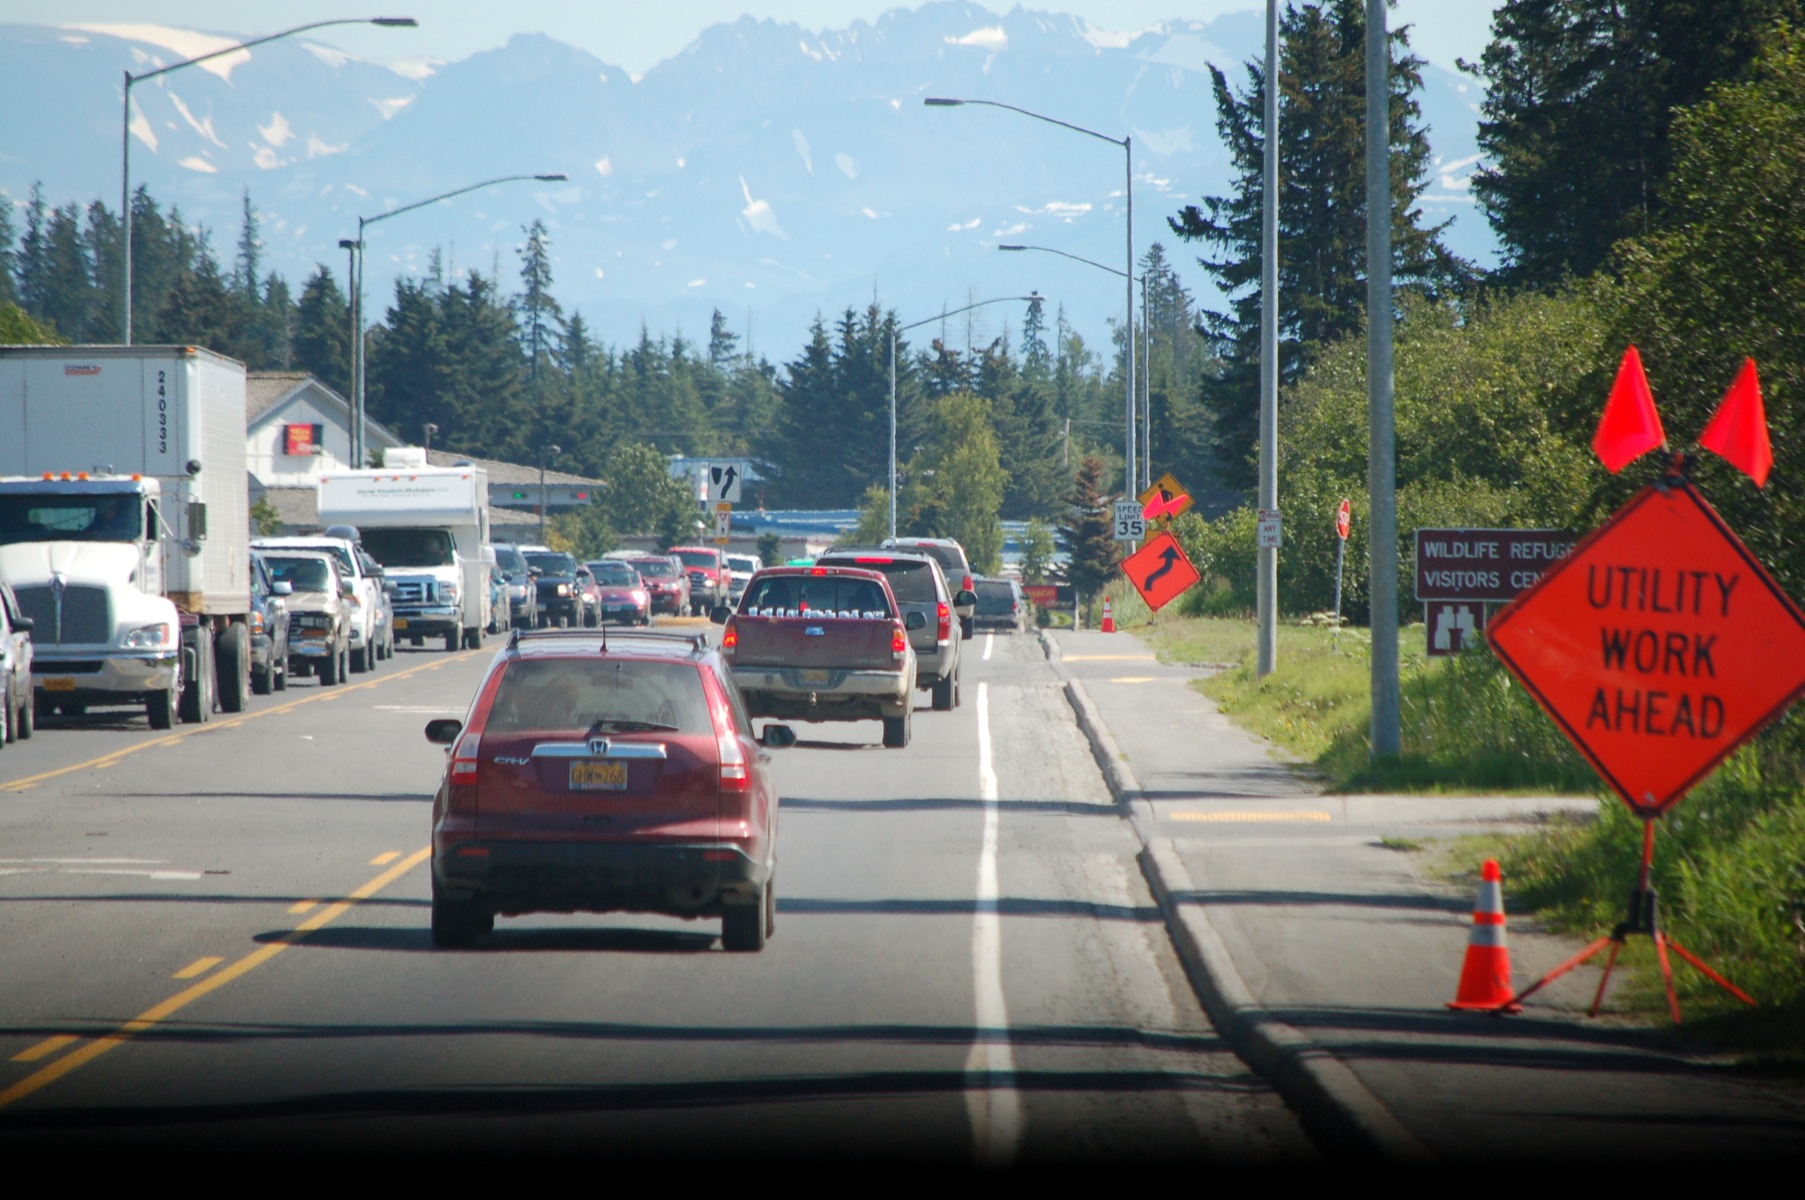 Traffic is backed up on the Sterling Highway from Pioneer Avenue to Lake Street as road crews worked on the highway repaving project about 12:30 p.m. Thursday. Work also was going on for the Homer gasline project between Heath Street and Lake Street by the post office.-Photo by Michael Armstrong, Homer News